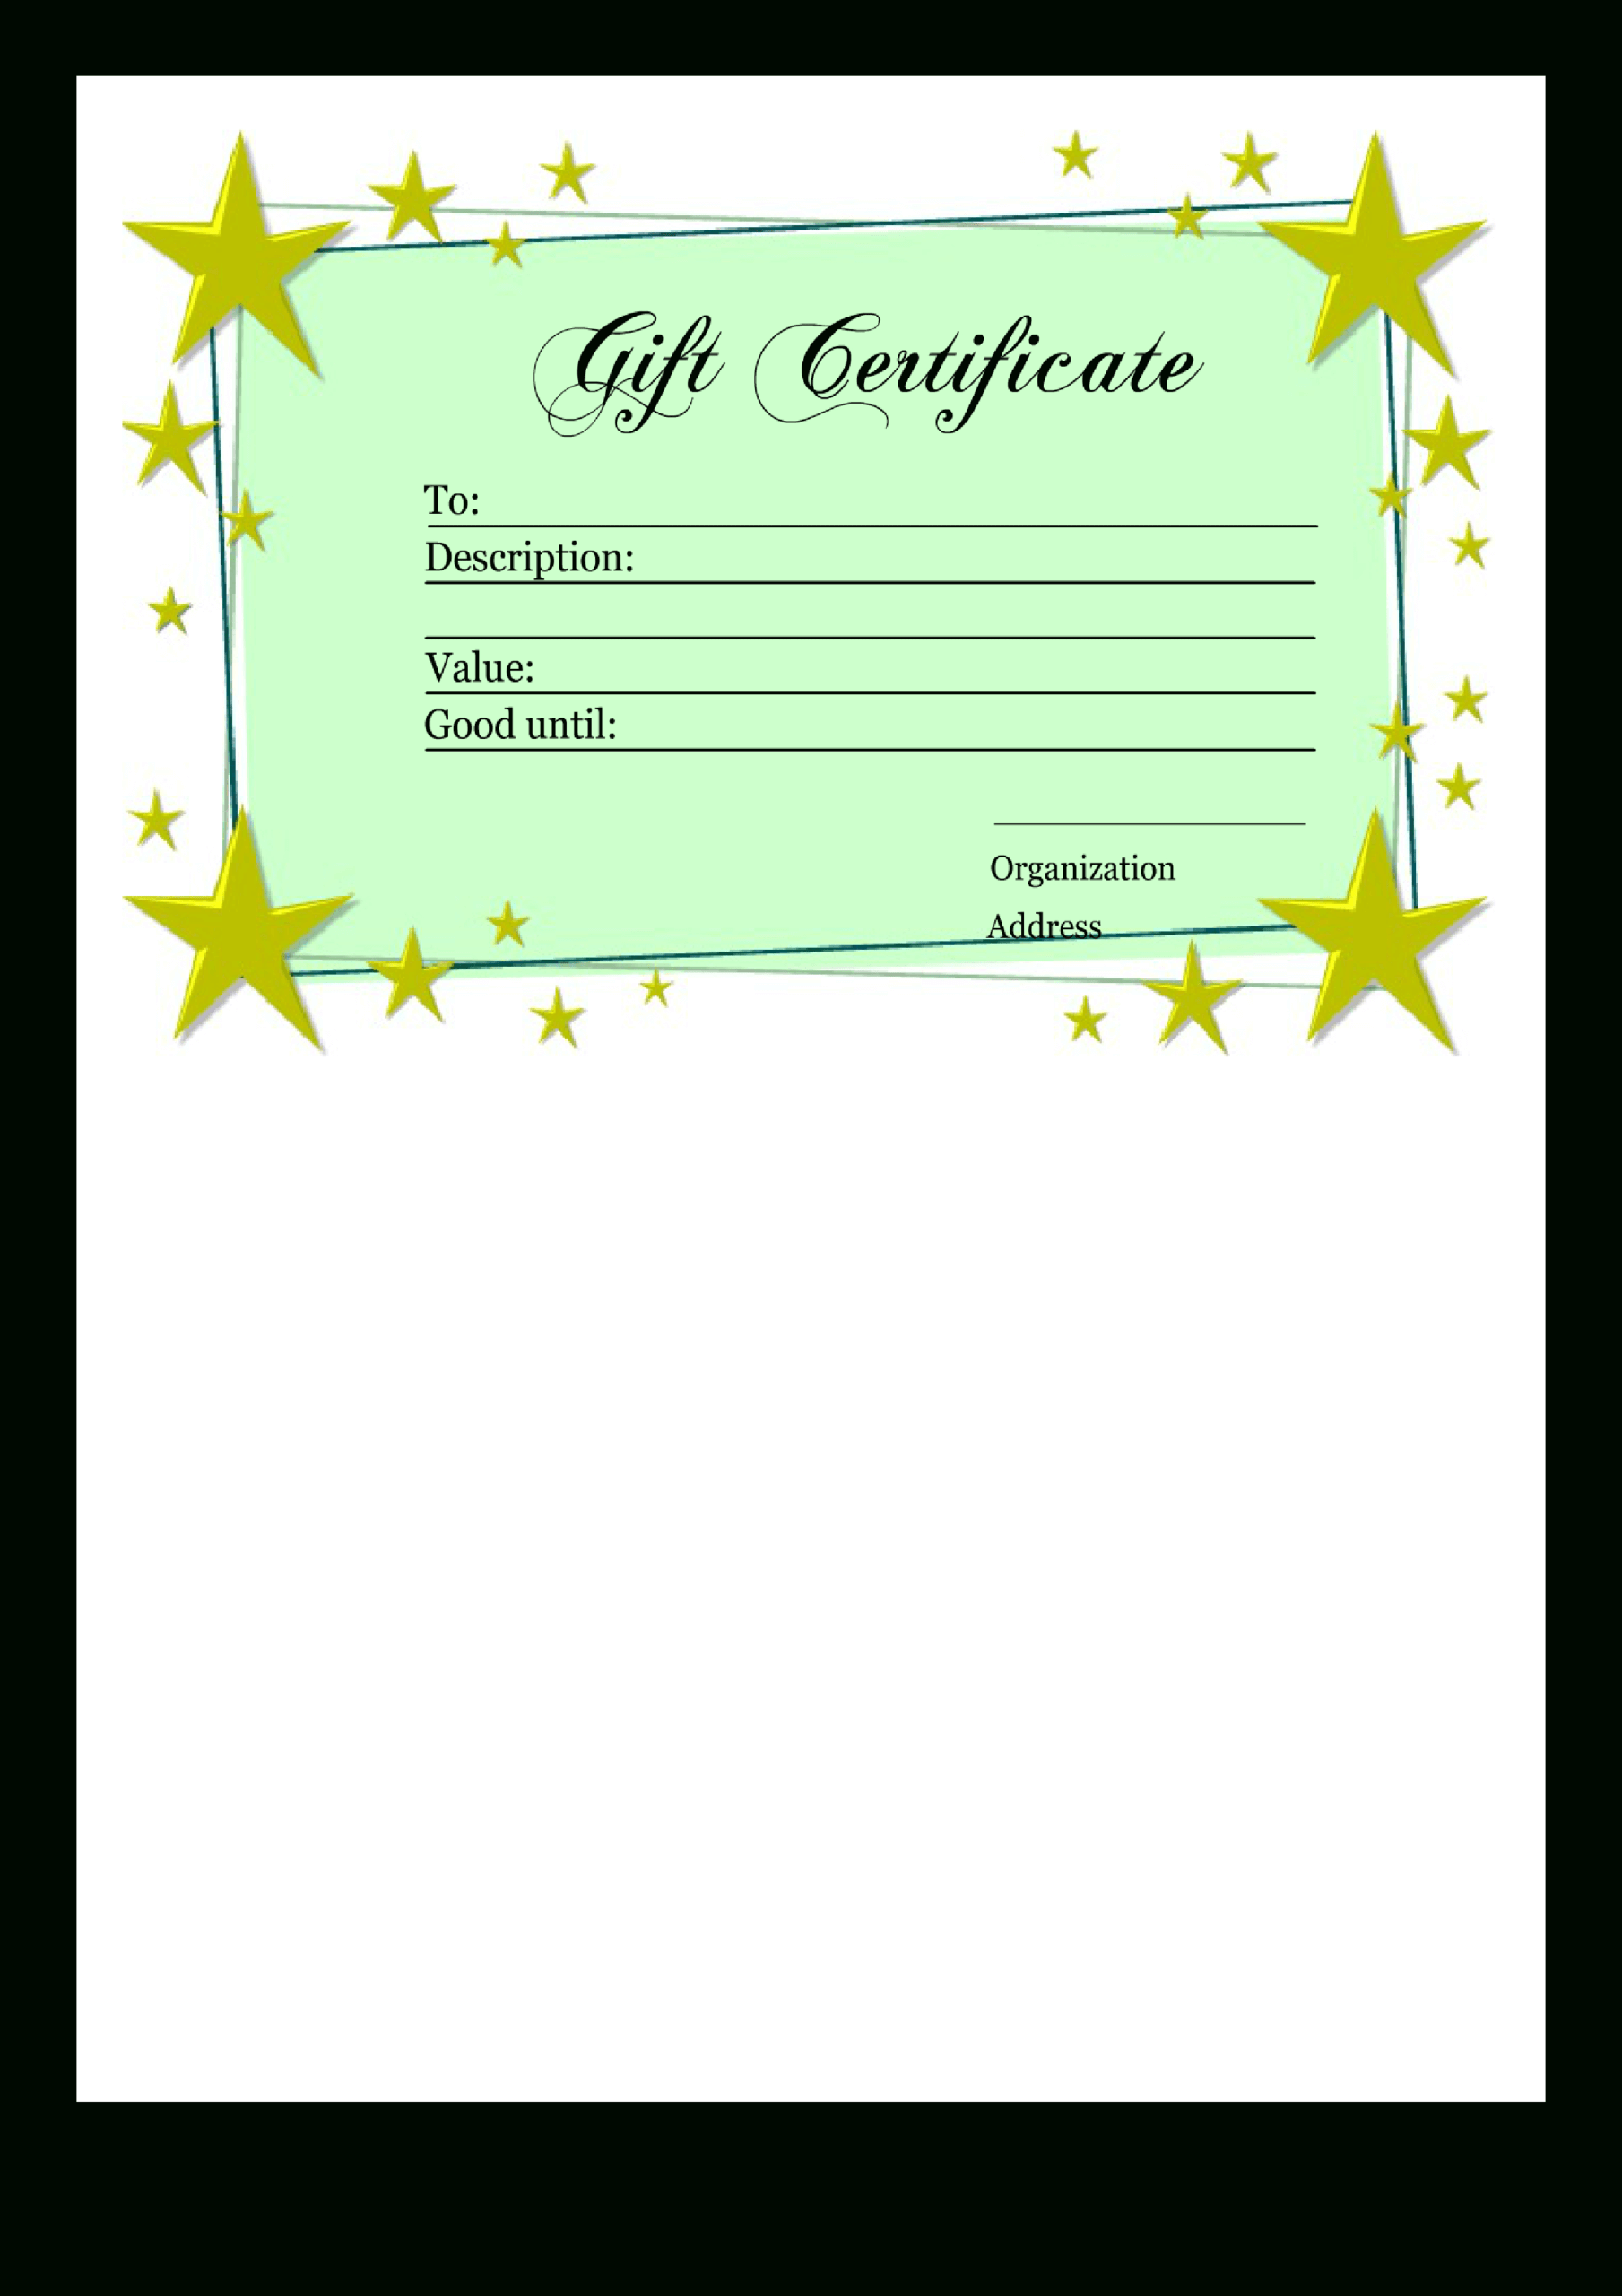 Homemade Gift Certificate Template | Templates At For Homemade Gift Certificate Template